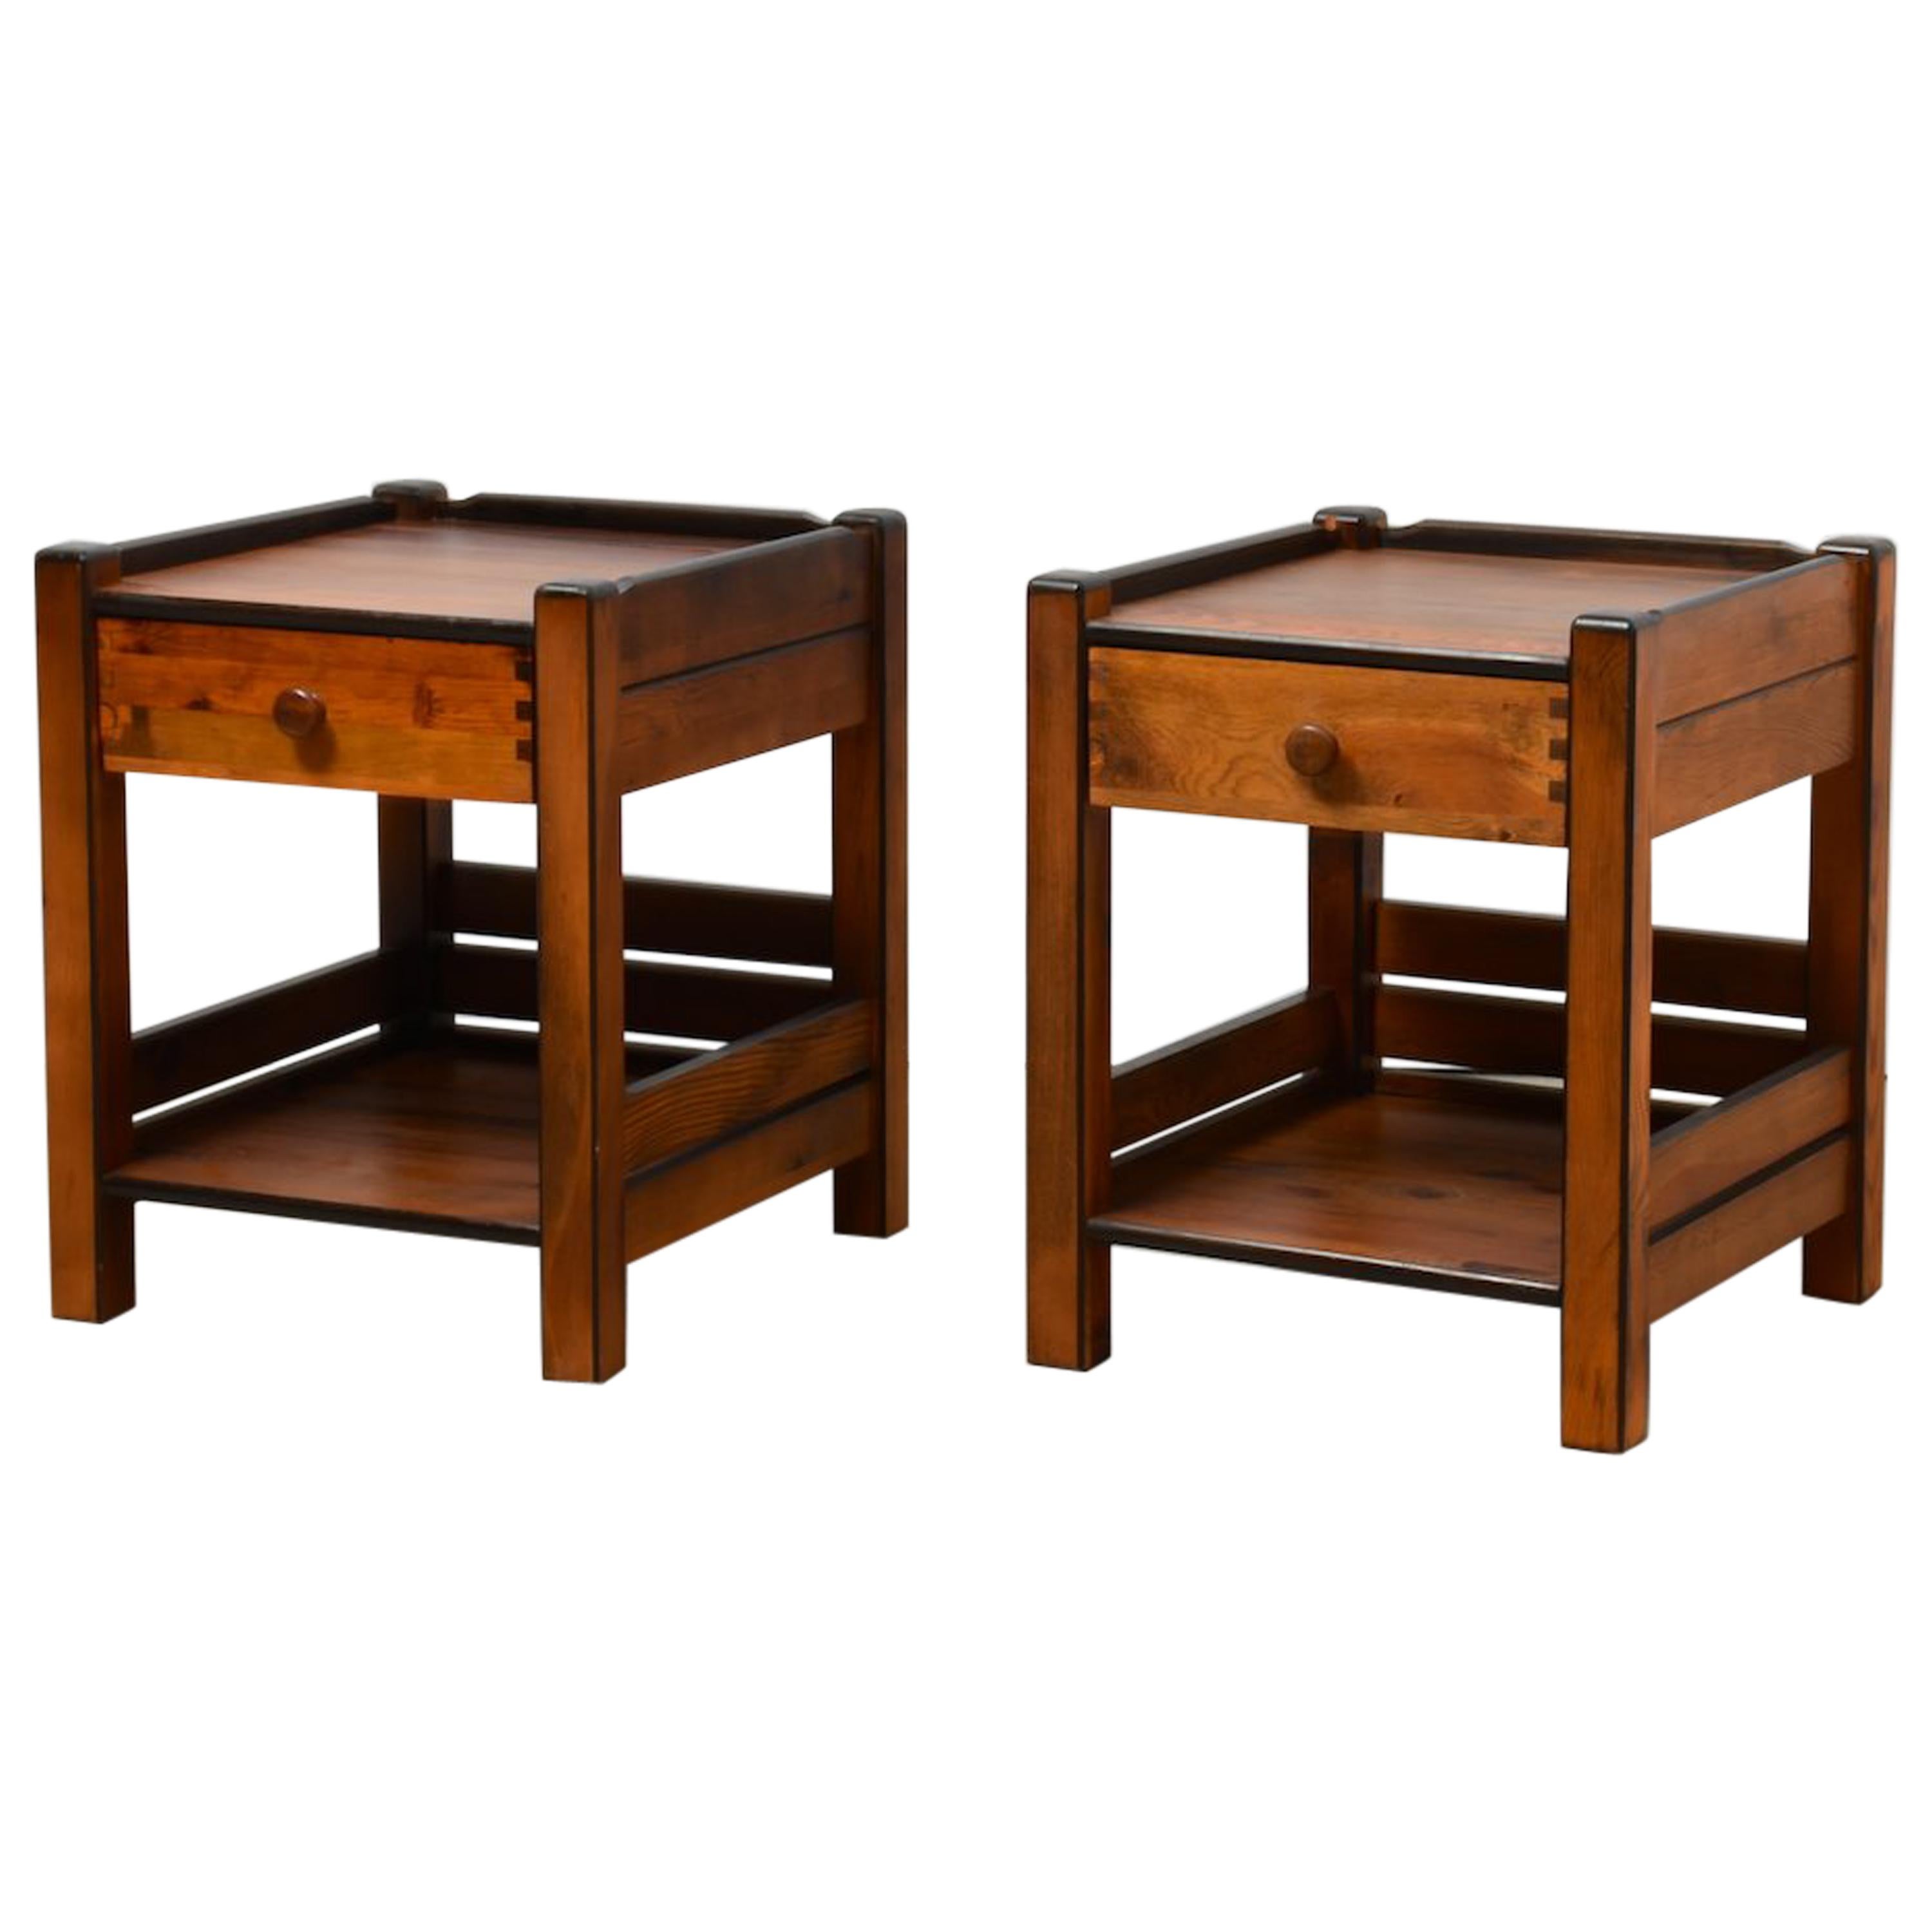 2 Identical Bedside Tables, 1970s from Former Yugoslavia, Stained Pine Wood For Sale